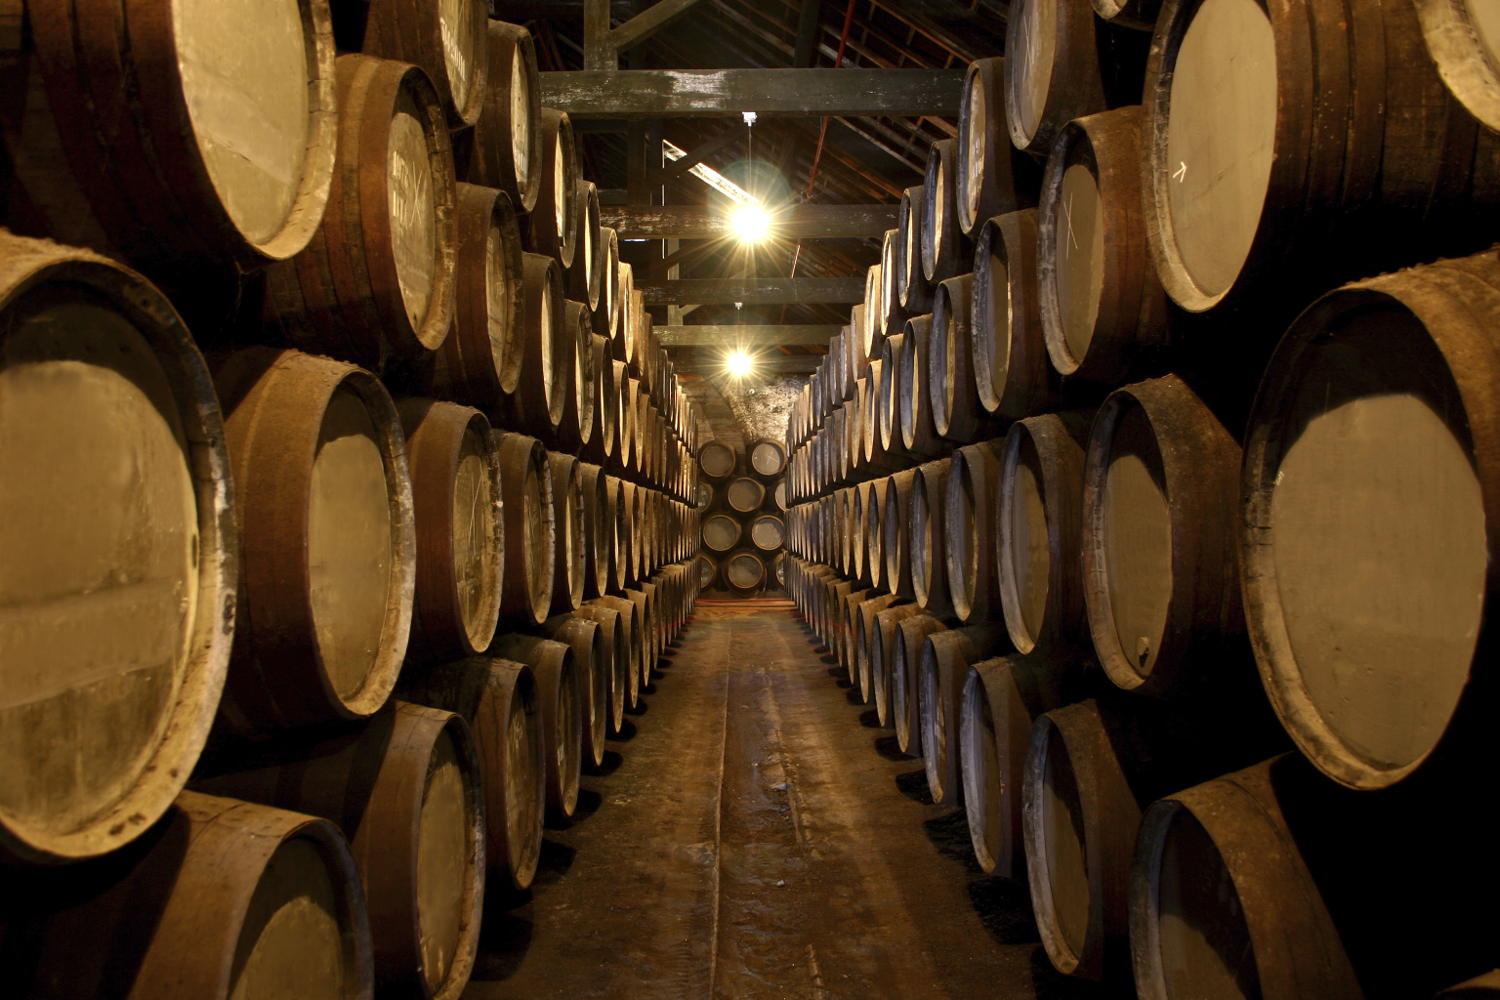 Portmaking has been the bread and butter of Porto for centuries. Image by Luis Pedrosa / E+ / Getty